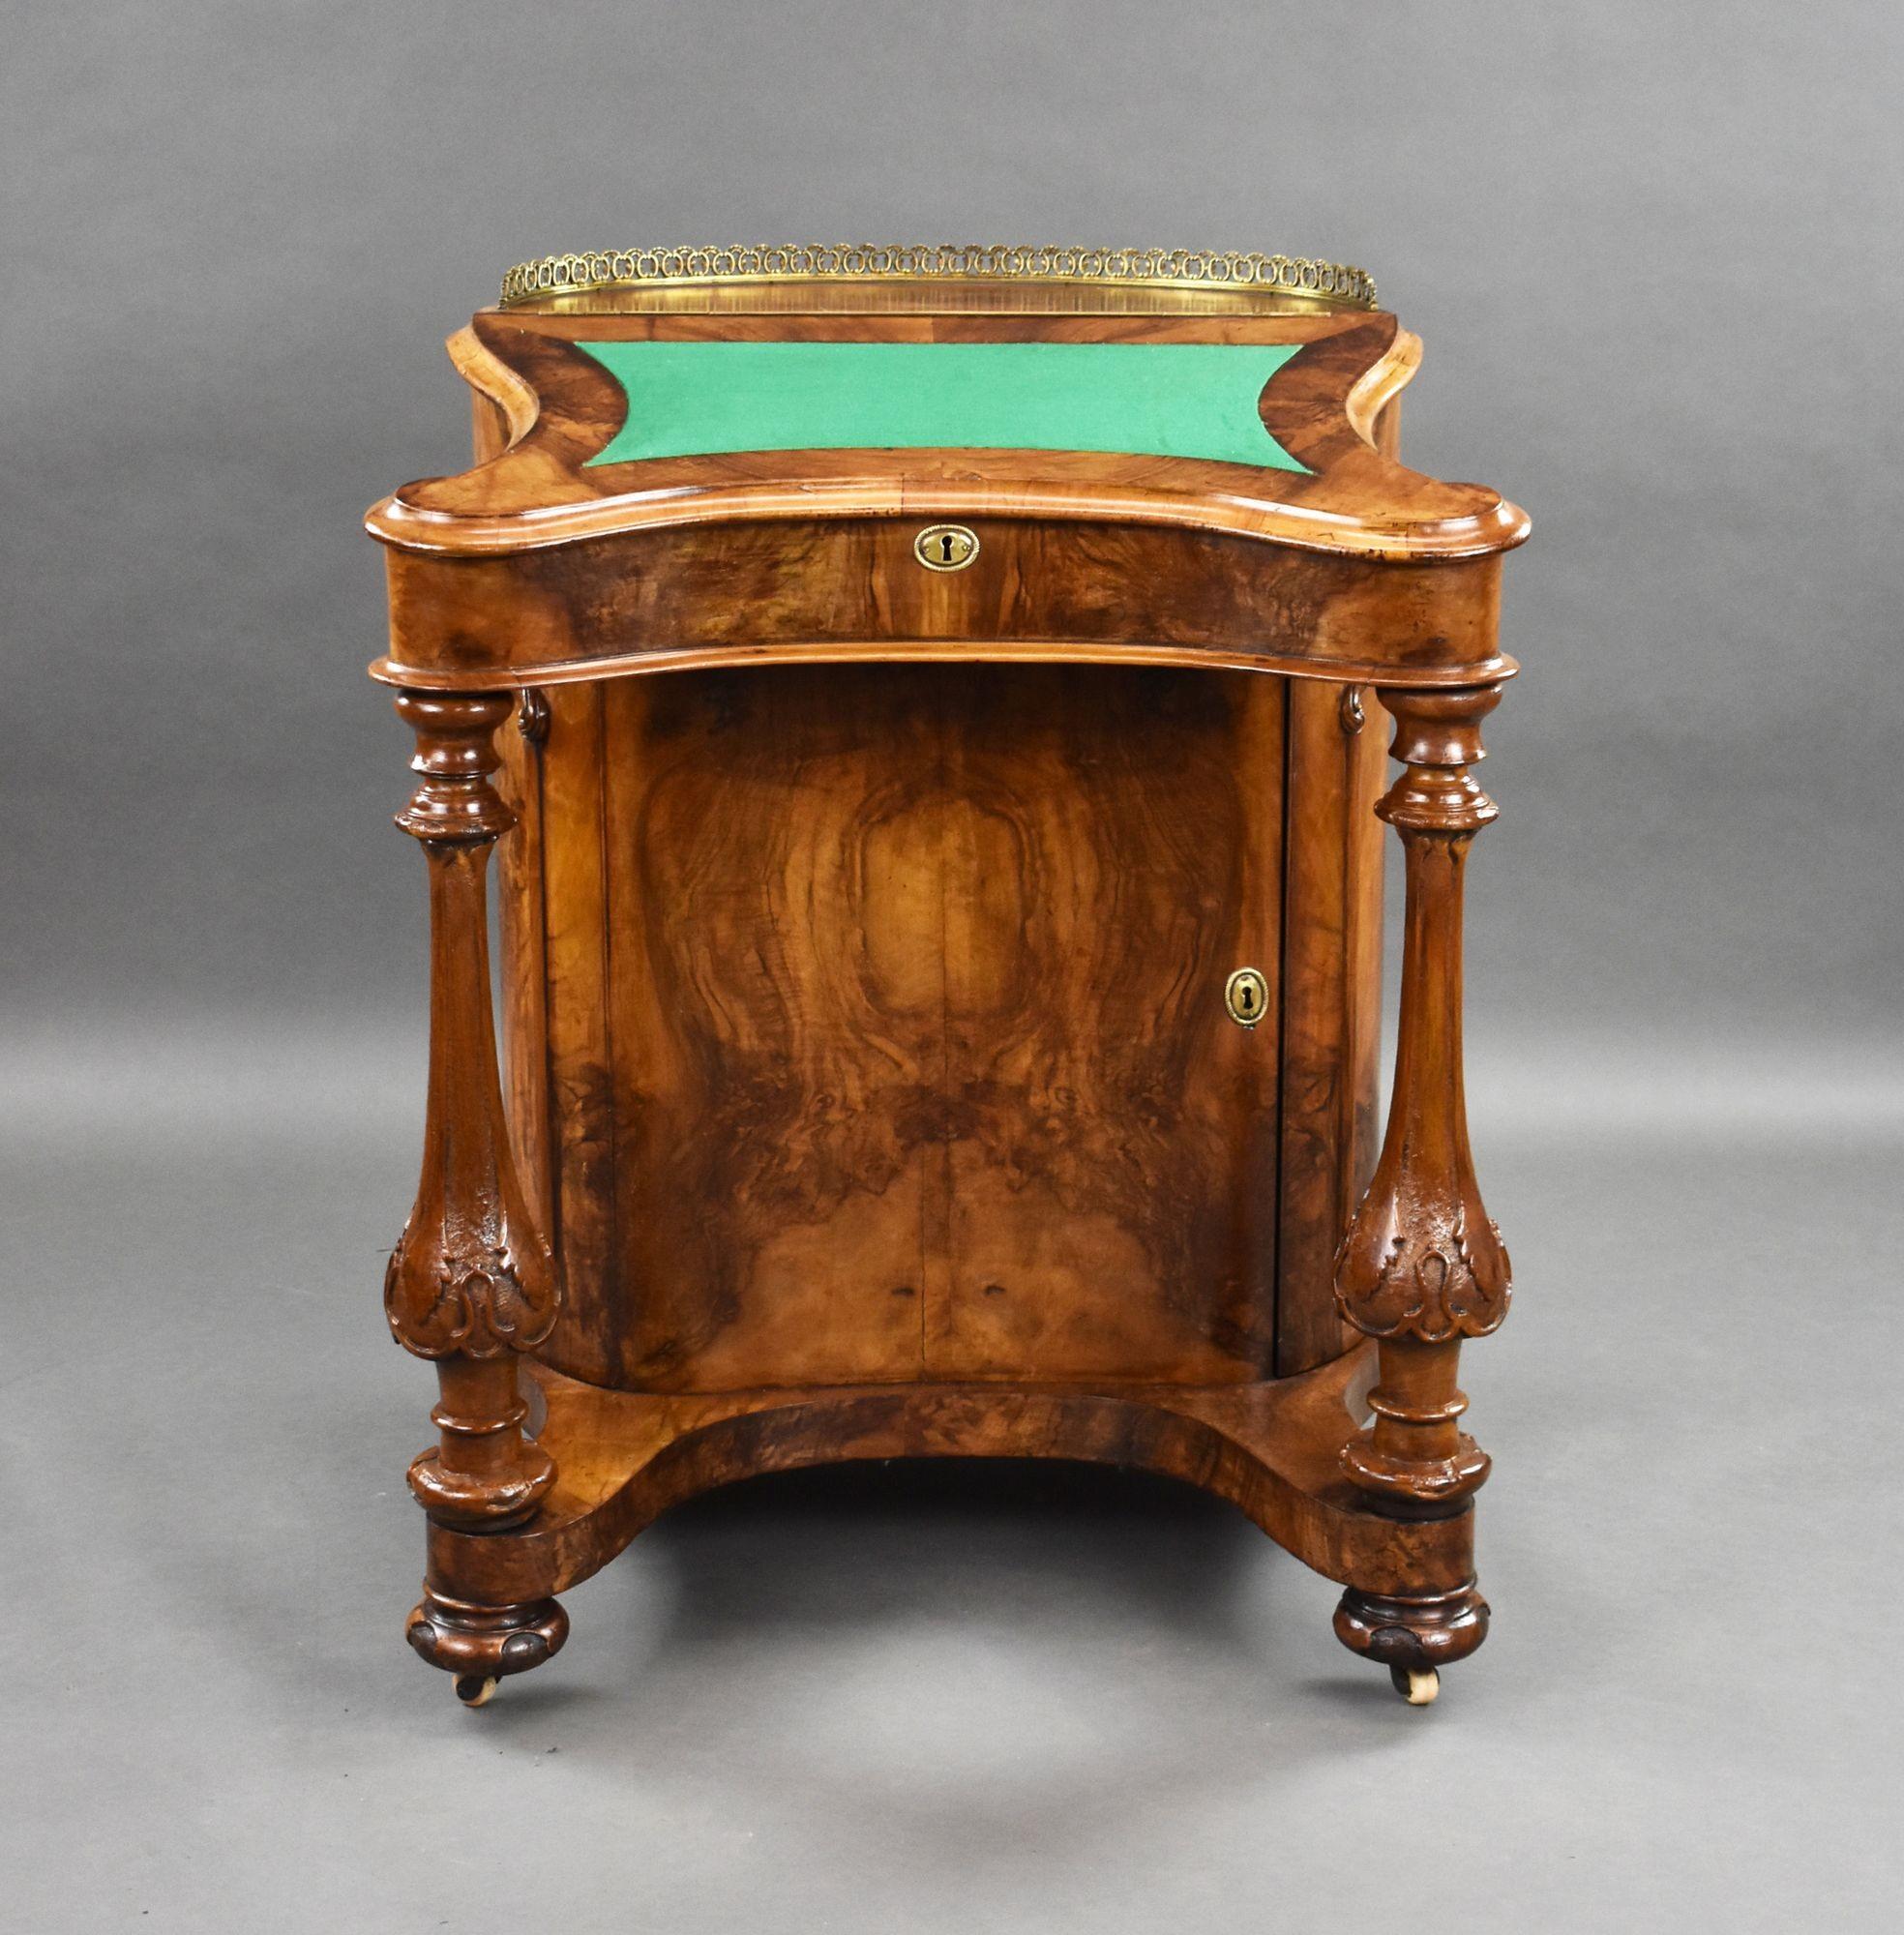 For sale is a good quality Victorian burr walnut davenport, of unusual form, having a brass galleried top, above a green baise writing surface, with a hinged fall opening to an interior fitted with three faux drawers and pigeon holes. The top is